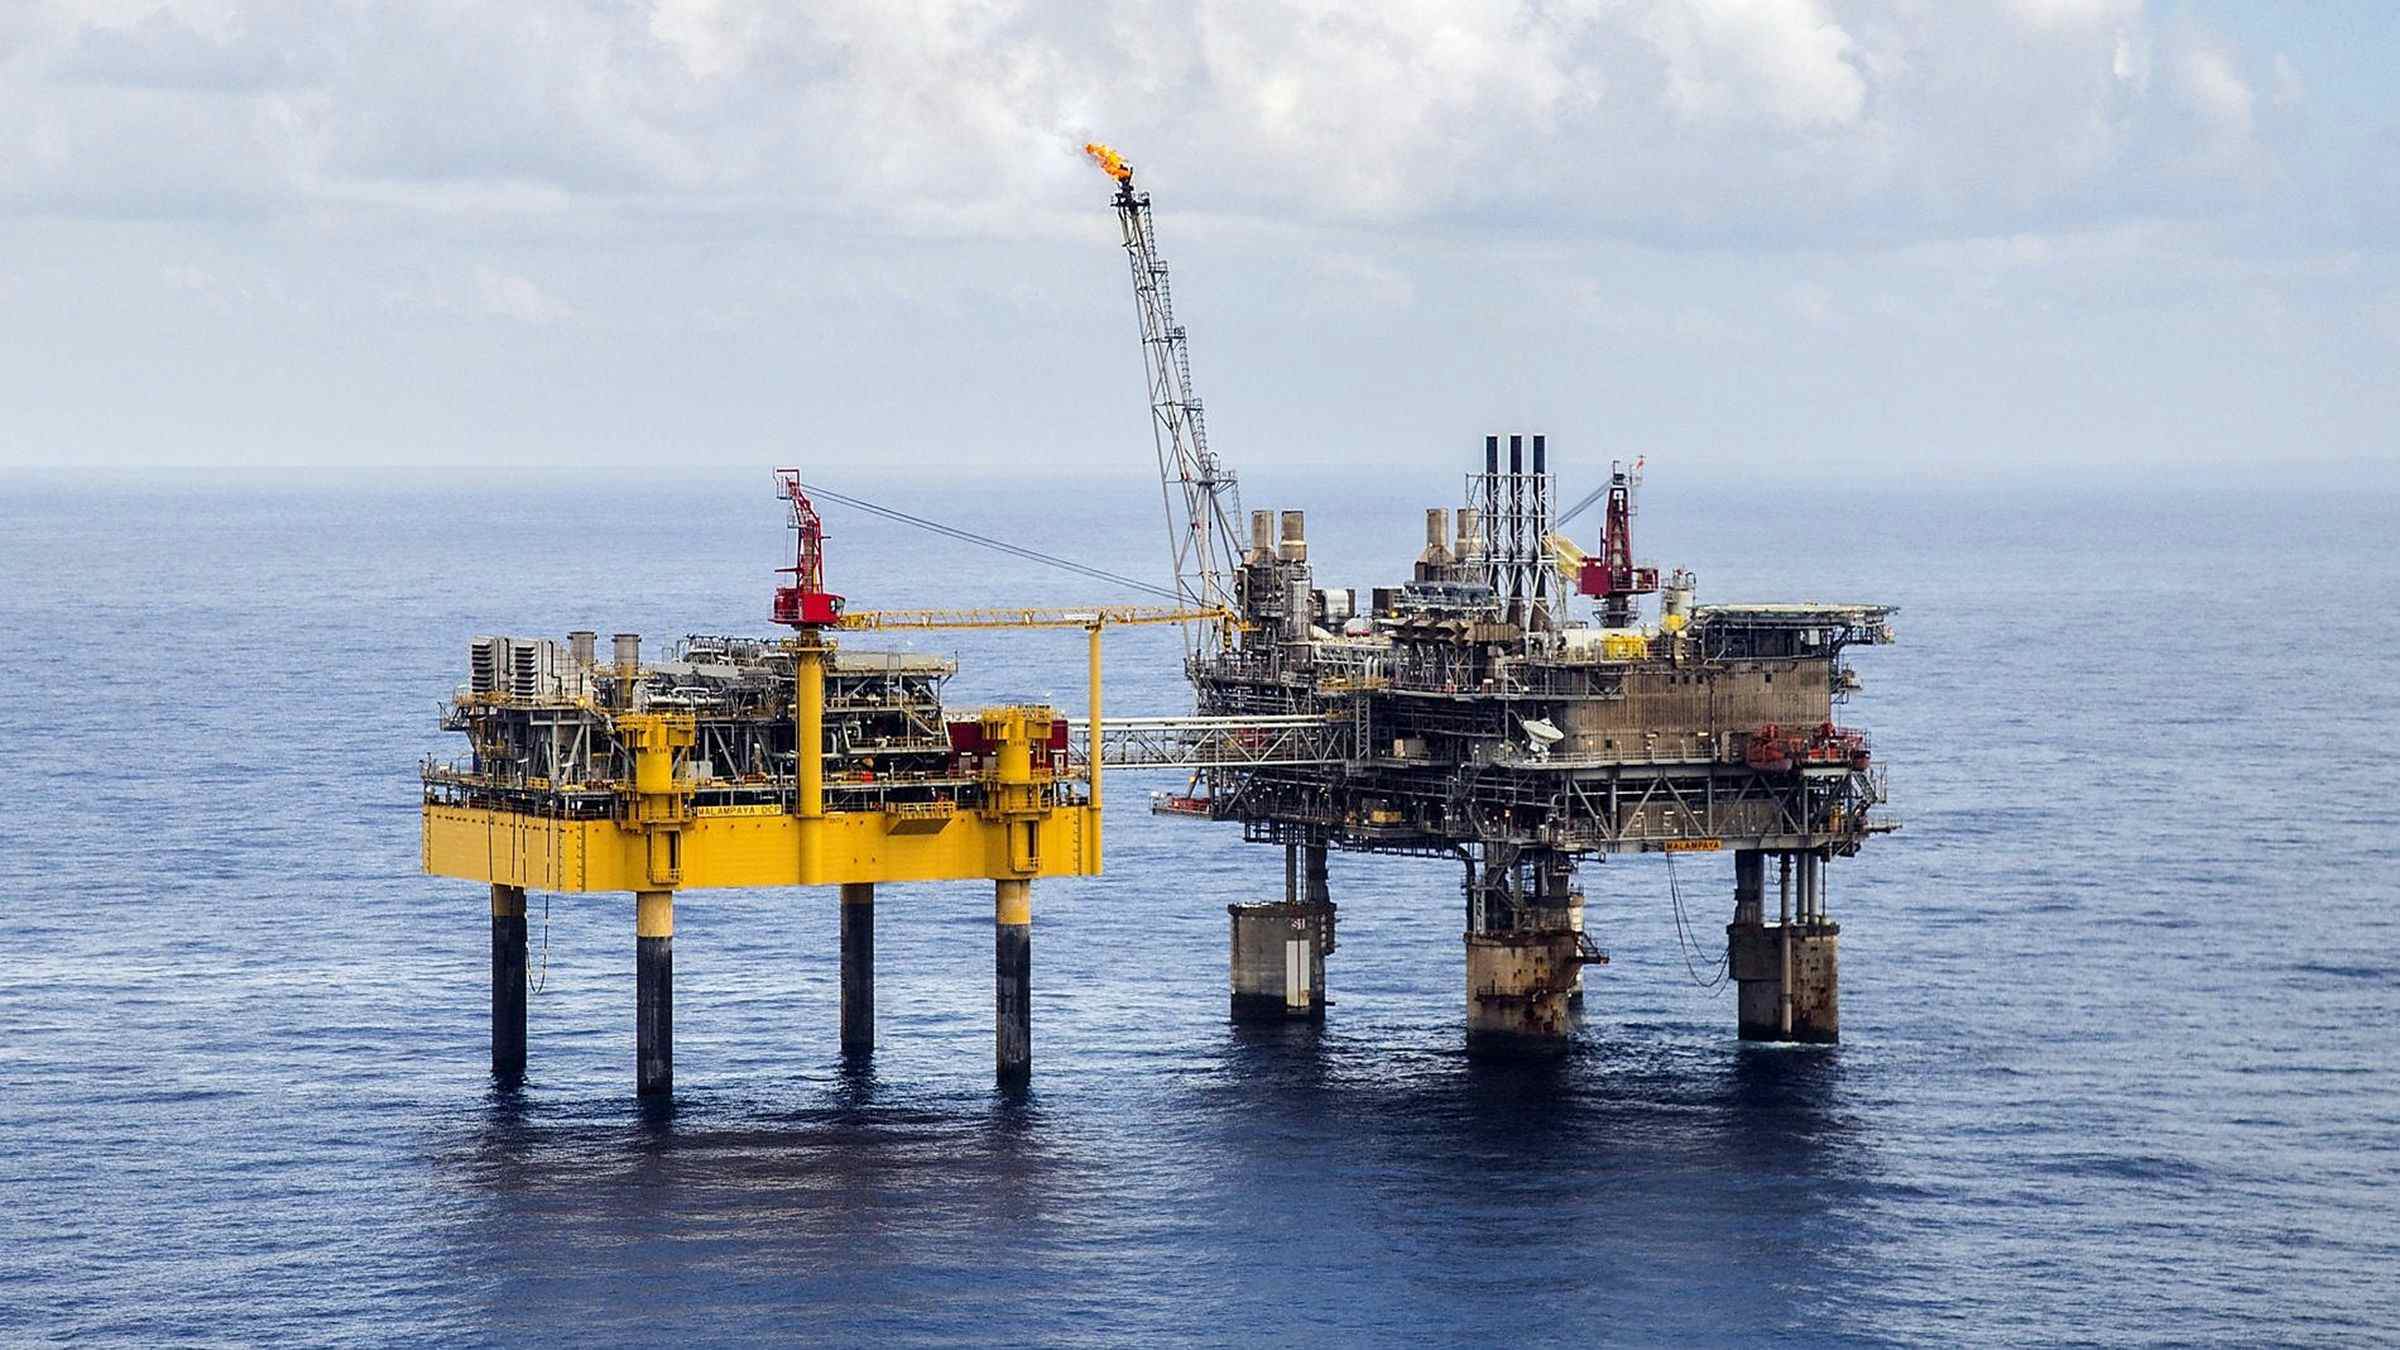 DOE welcomes the ongoing completion of natural gas projects in Luzon